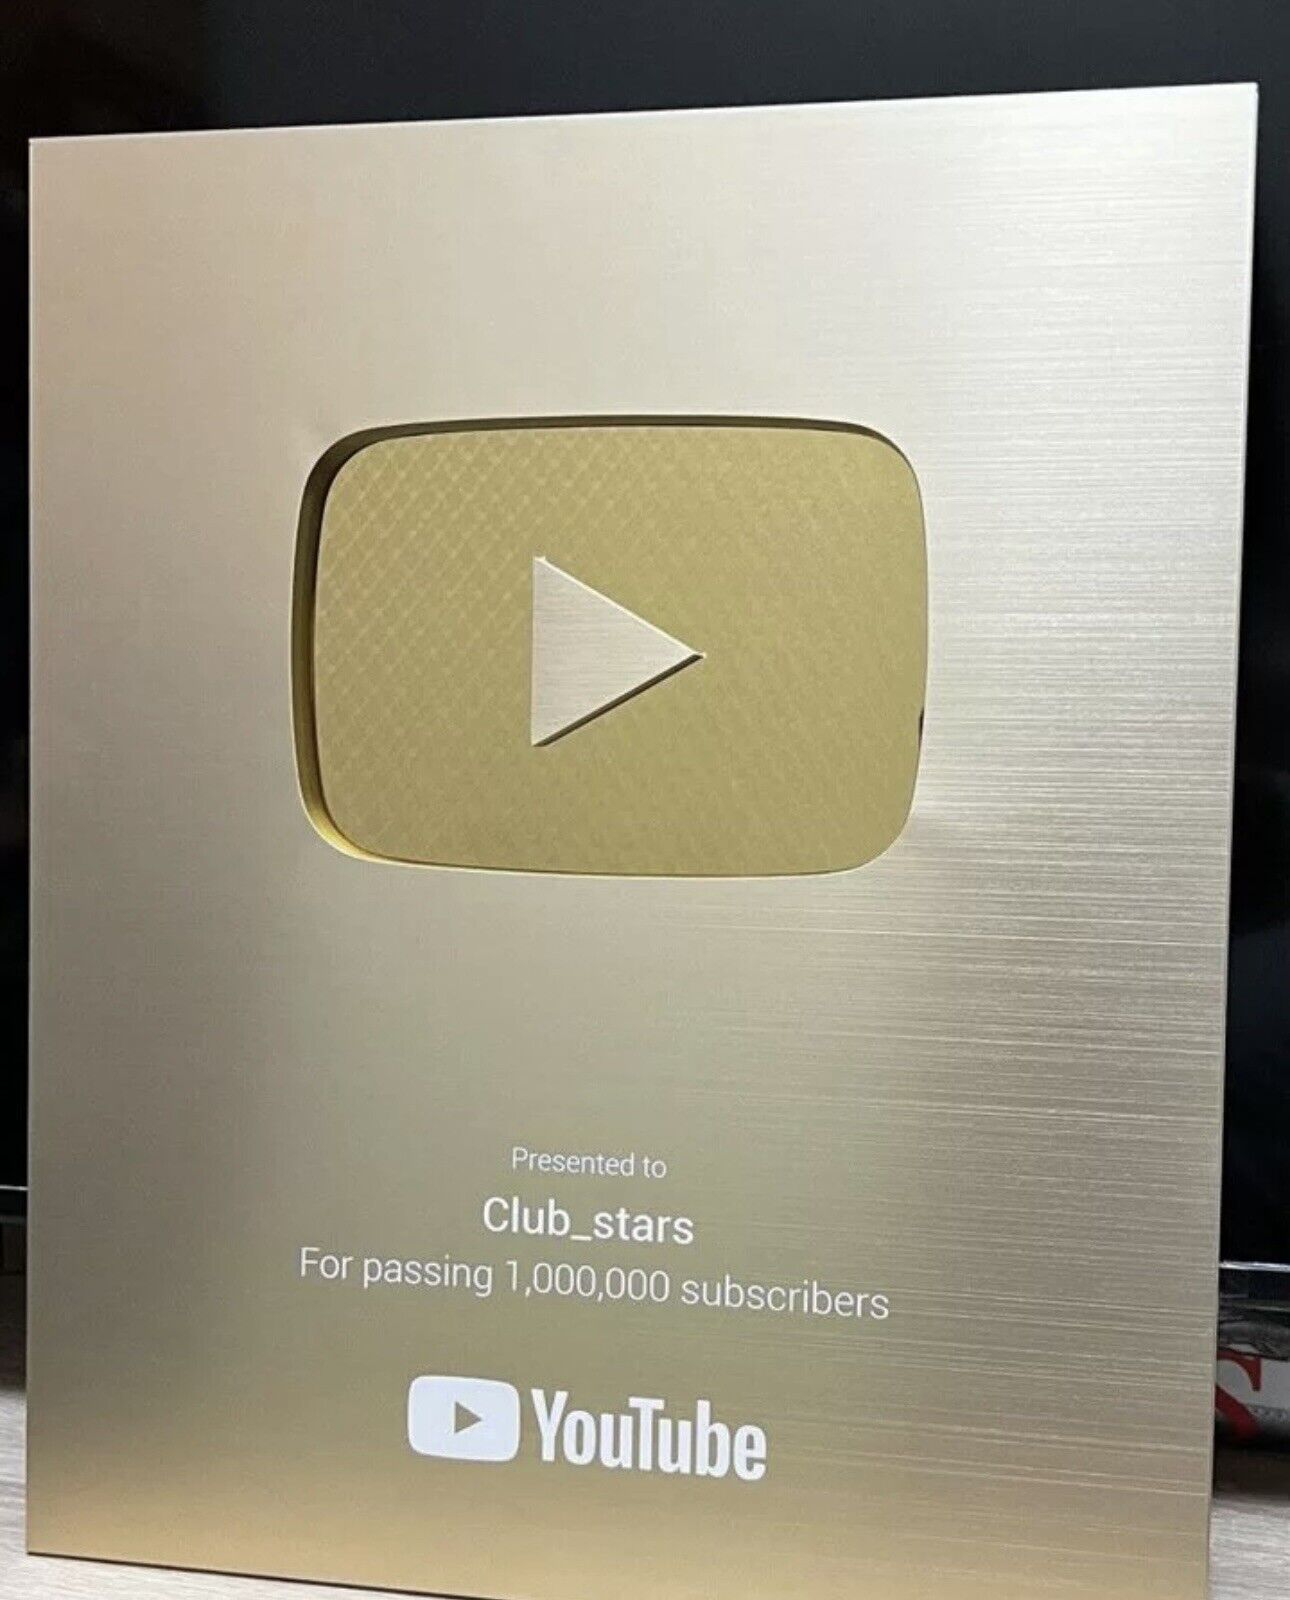 AUTHENTIC YOUTUBE GOLD PLAY BUTTON 1M AWARD, RARE, BRAND NEW